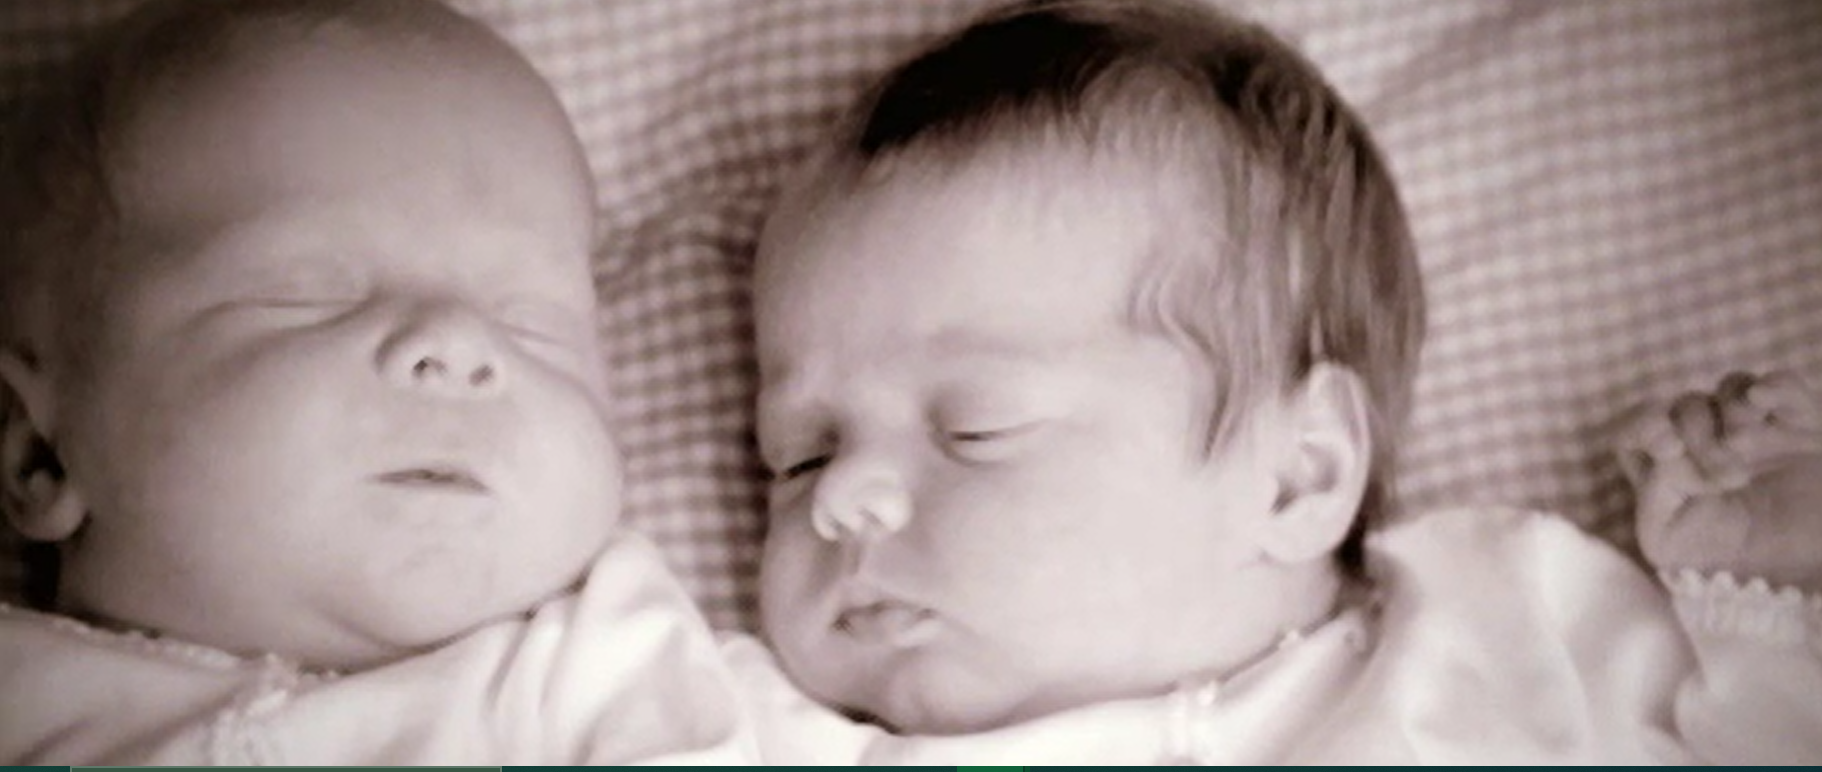 Zoe and Thomas Quaid, from a video dated March 10, 2009 | Source: Oprah/ownhealth